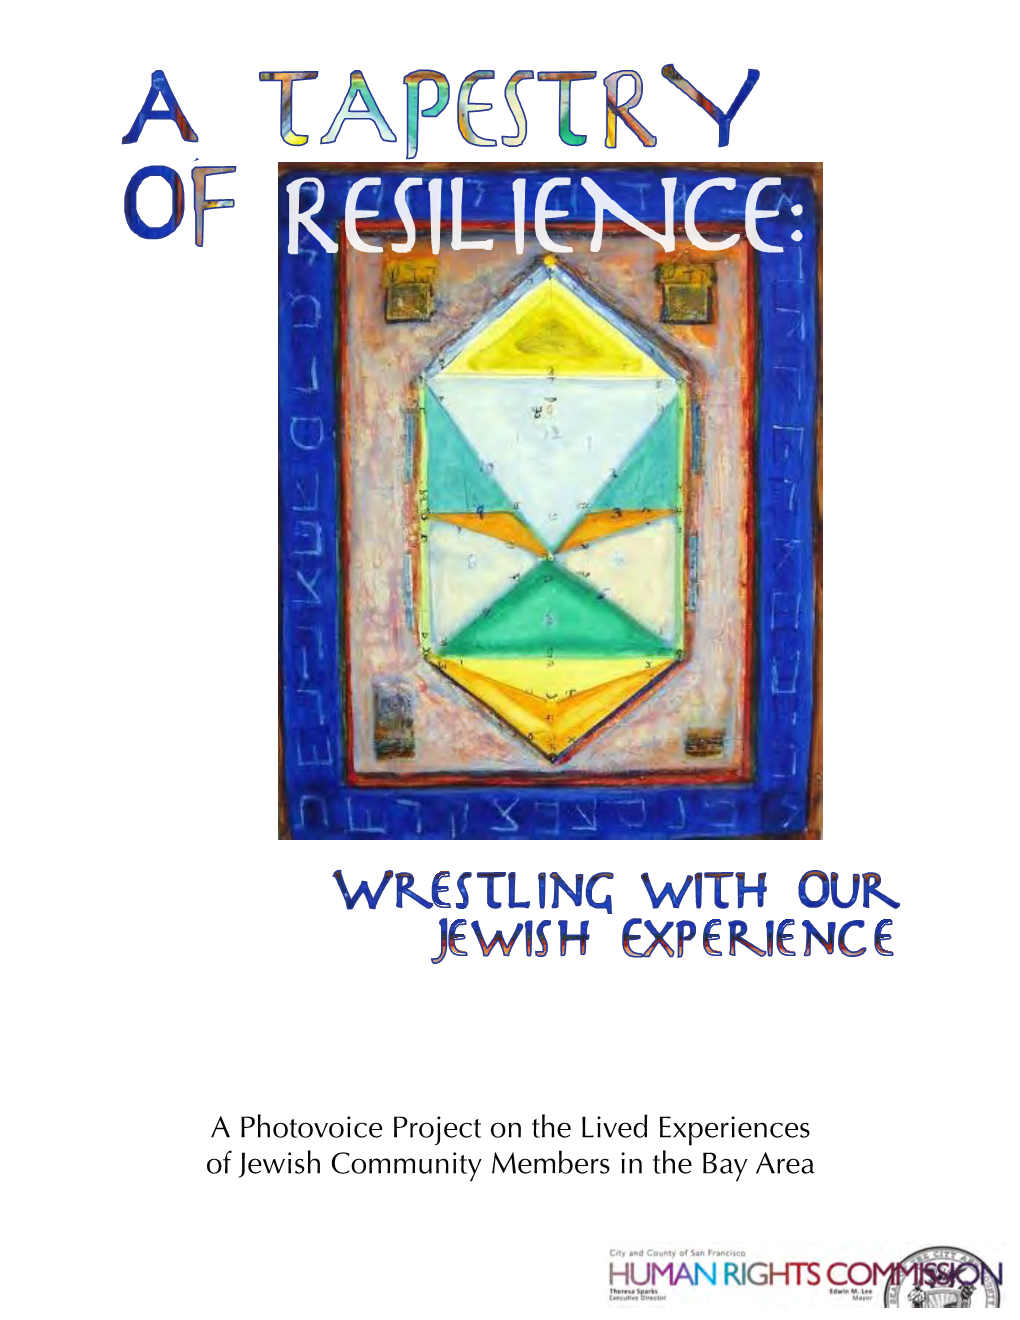 Community Photovoice Project on Anti-Semitism and Resilience